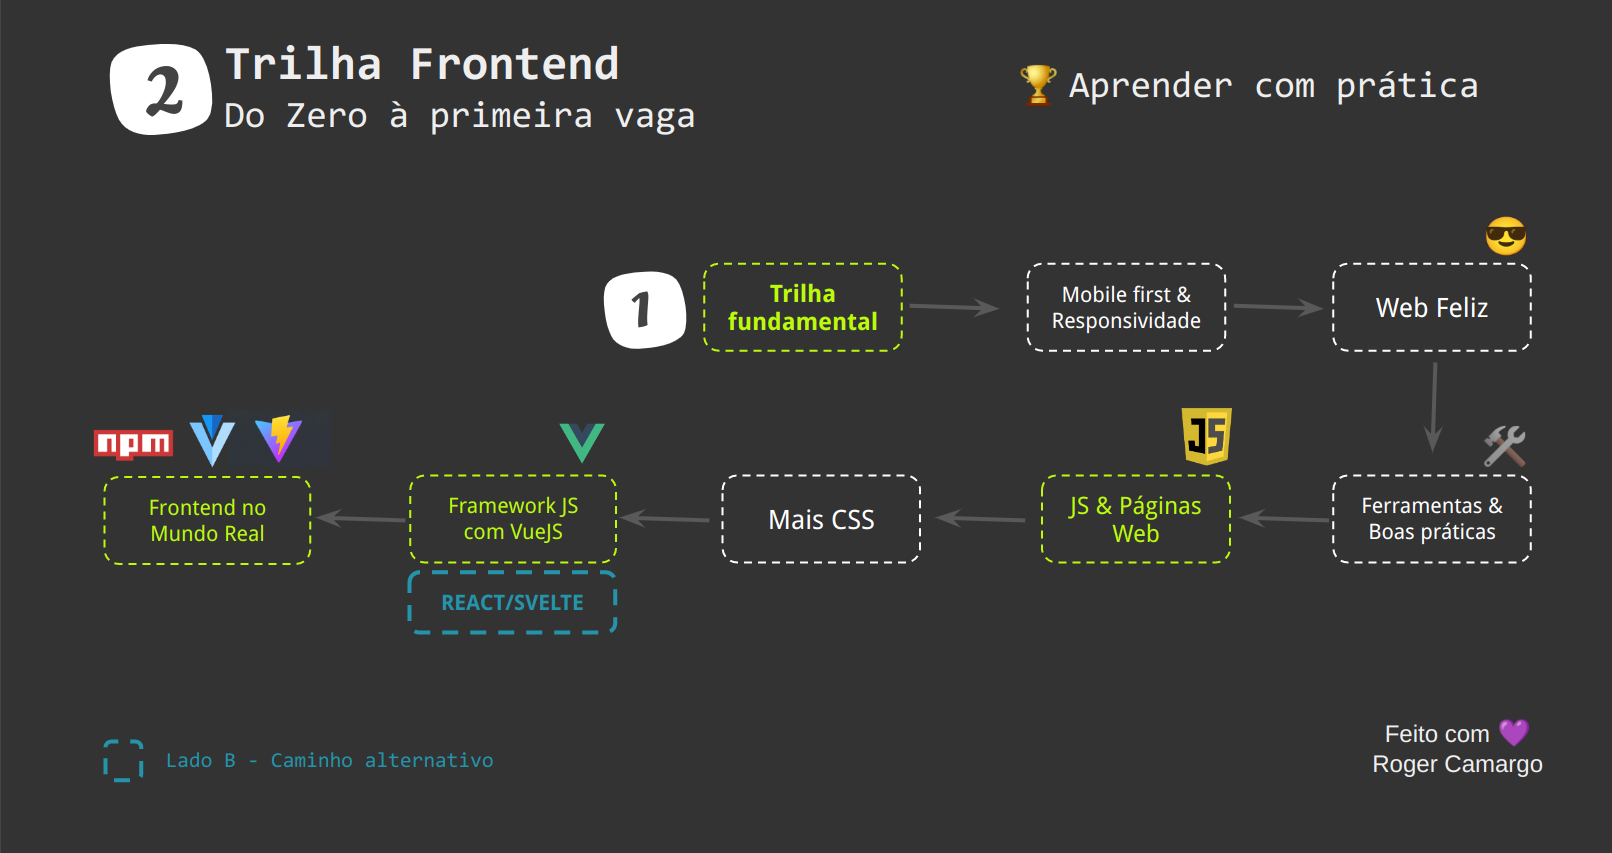 Trilha Frontend